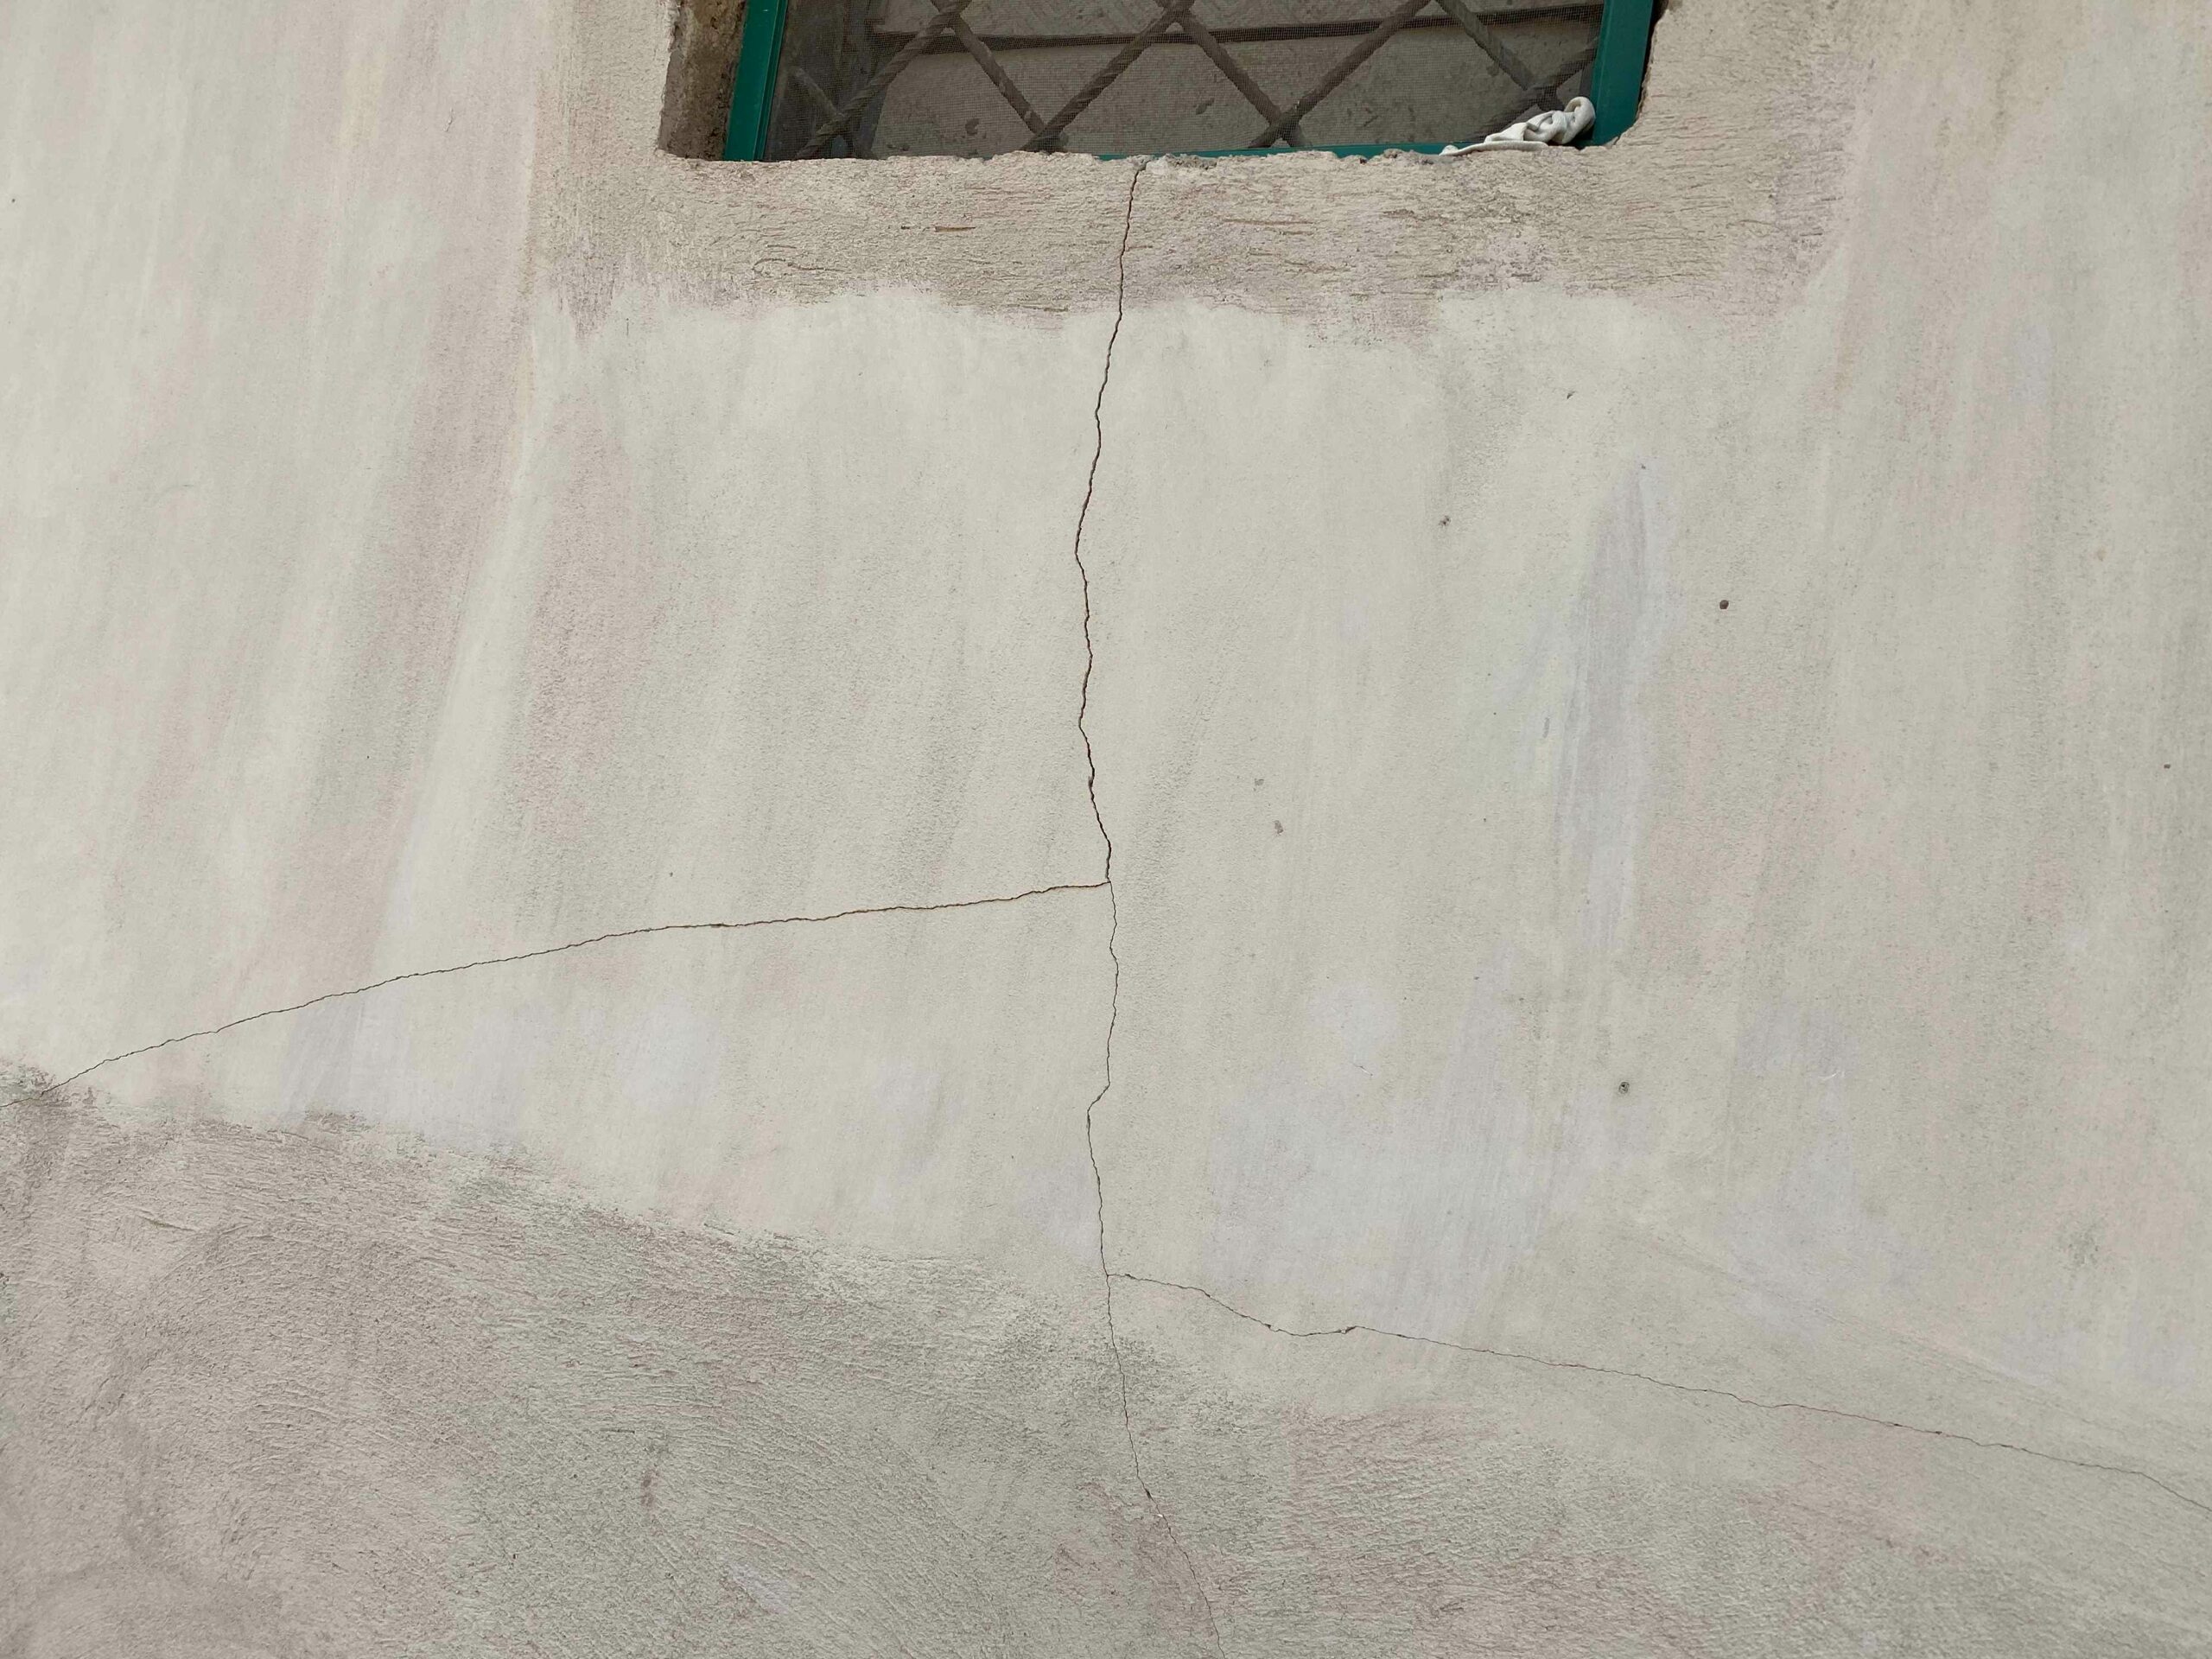 Part of the Moshood Aminullahi's house cracked due to the rock bomb blast at Surelere Community